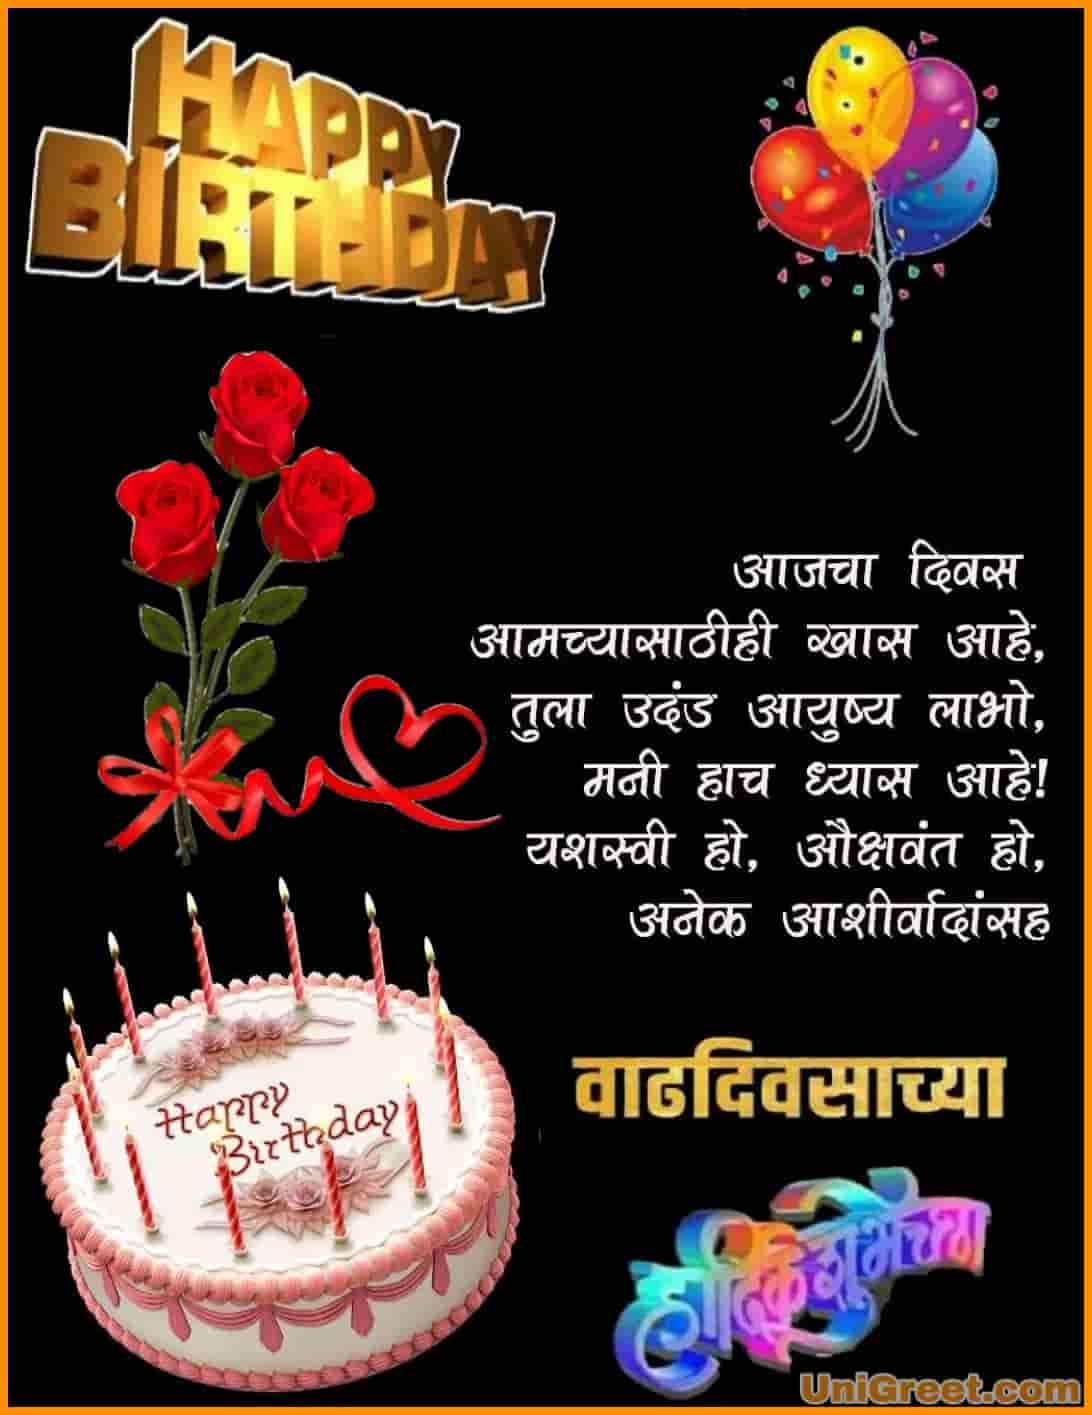 Happy Birthday Images With Quotes In Marathi